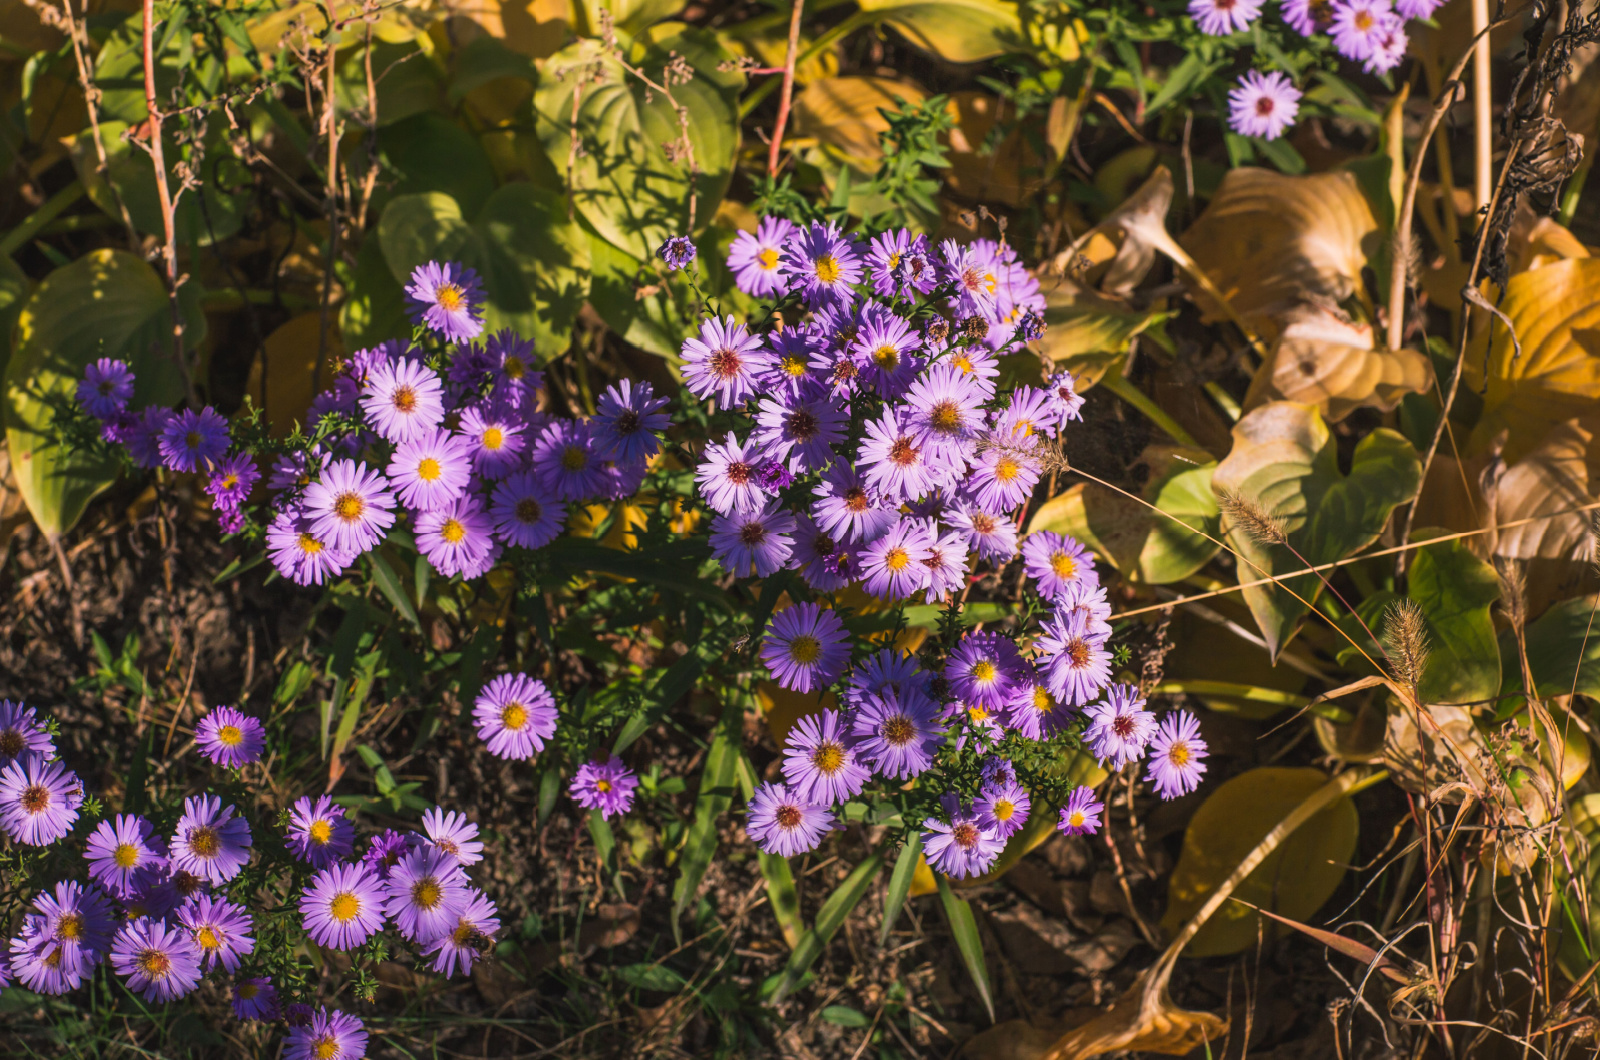 Purple asters with yellow centers